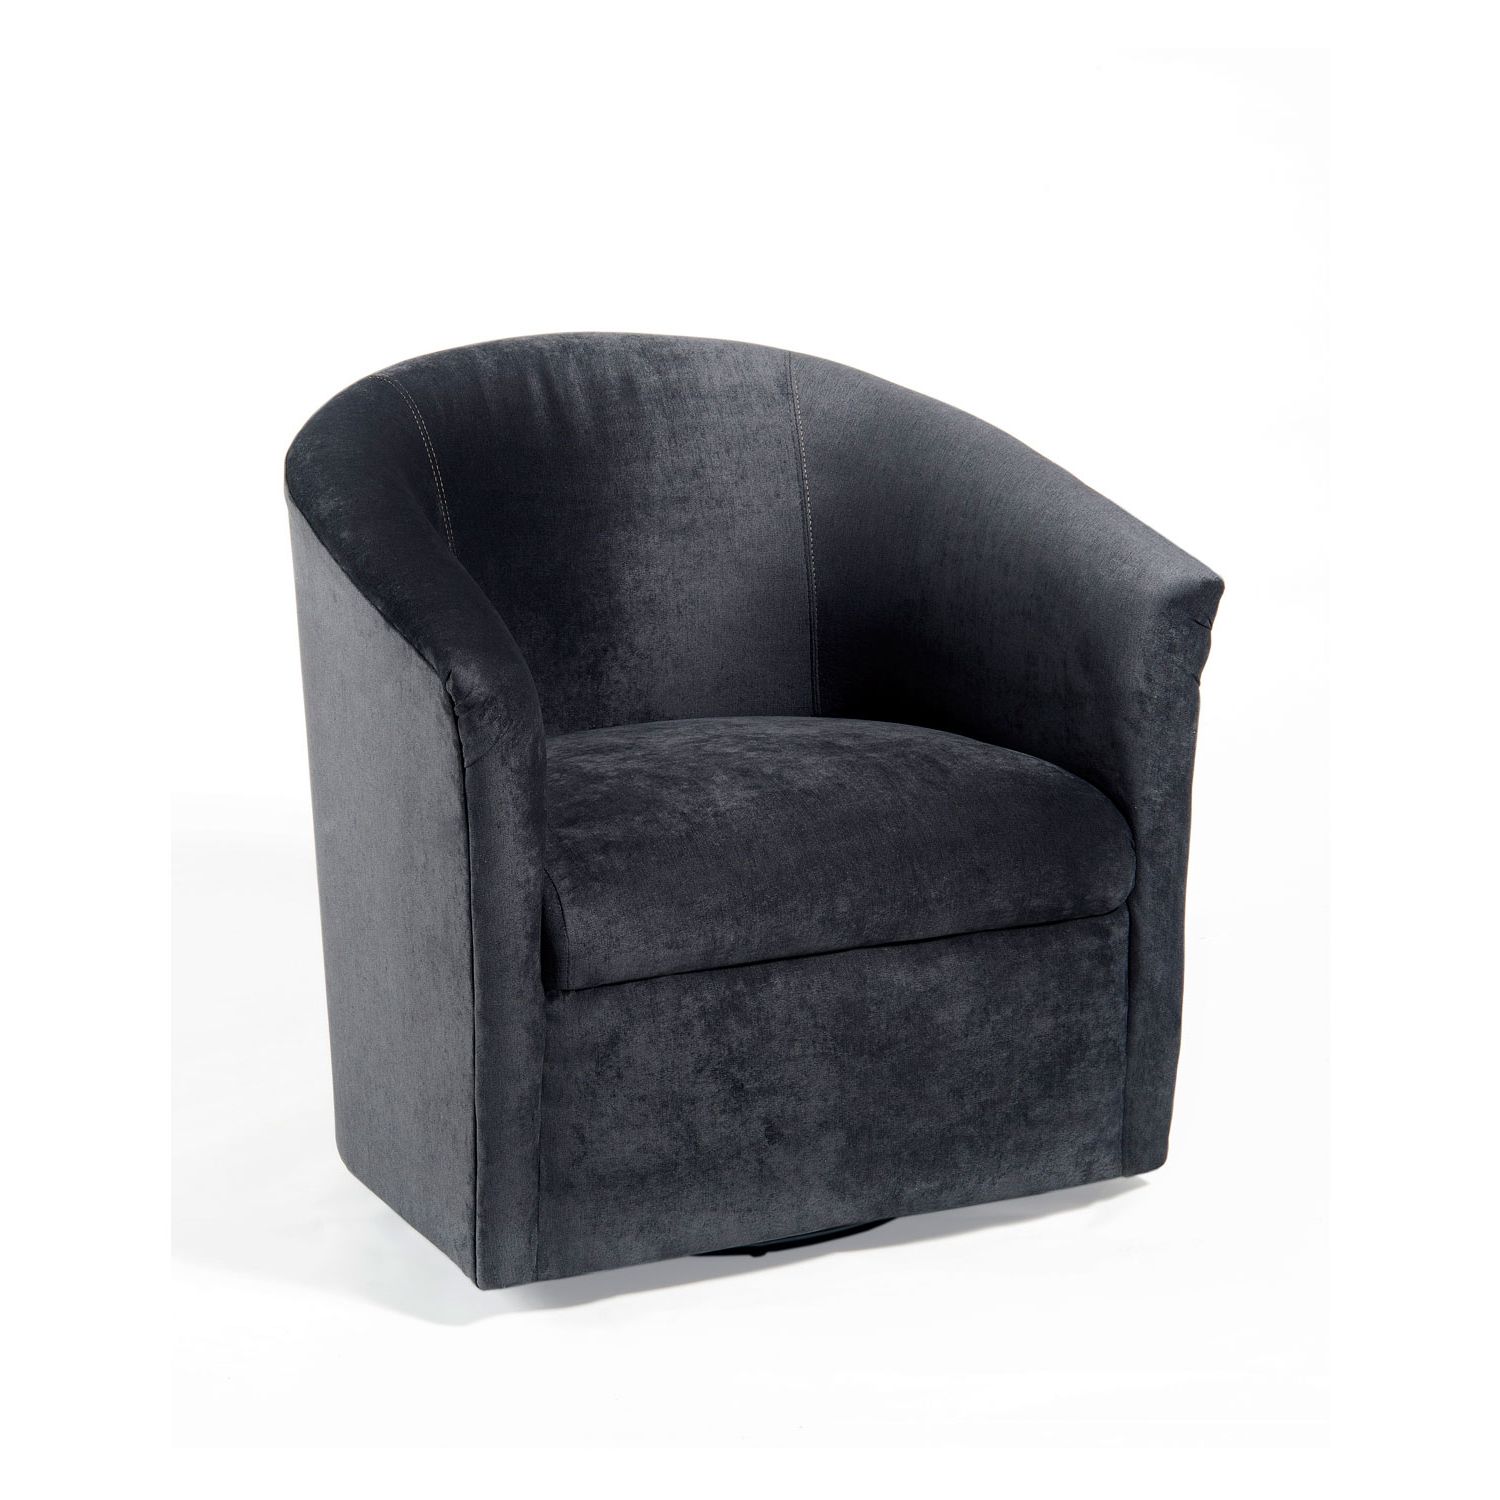 Charcoal Swivel Chairs For Current Comfort Pointe Elizabeth Charcoal Swivel Chair 2001  (View 4 of 20)